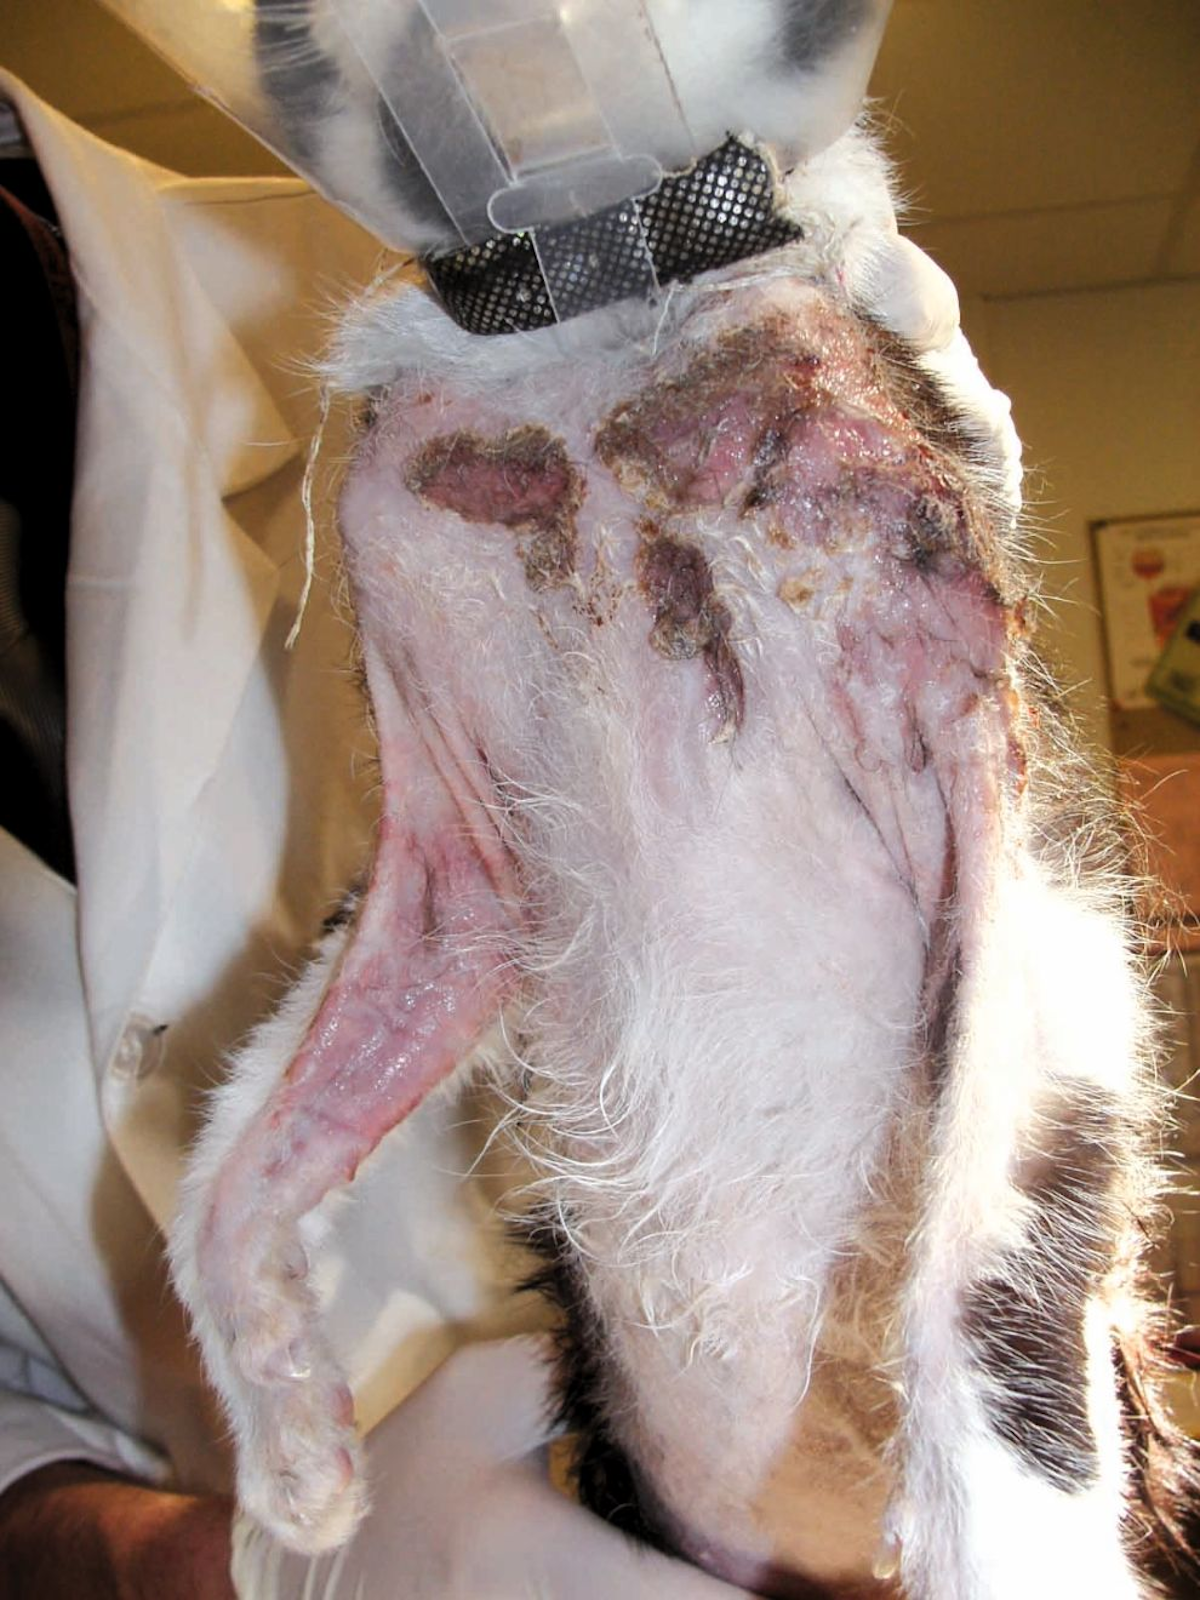  A cat with CNEL showing alopecia and erythema of the cranioventral thorax and medial aspect of the forelimbs, with severe exudative ulceration and crusting over the left shoulder.